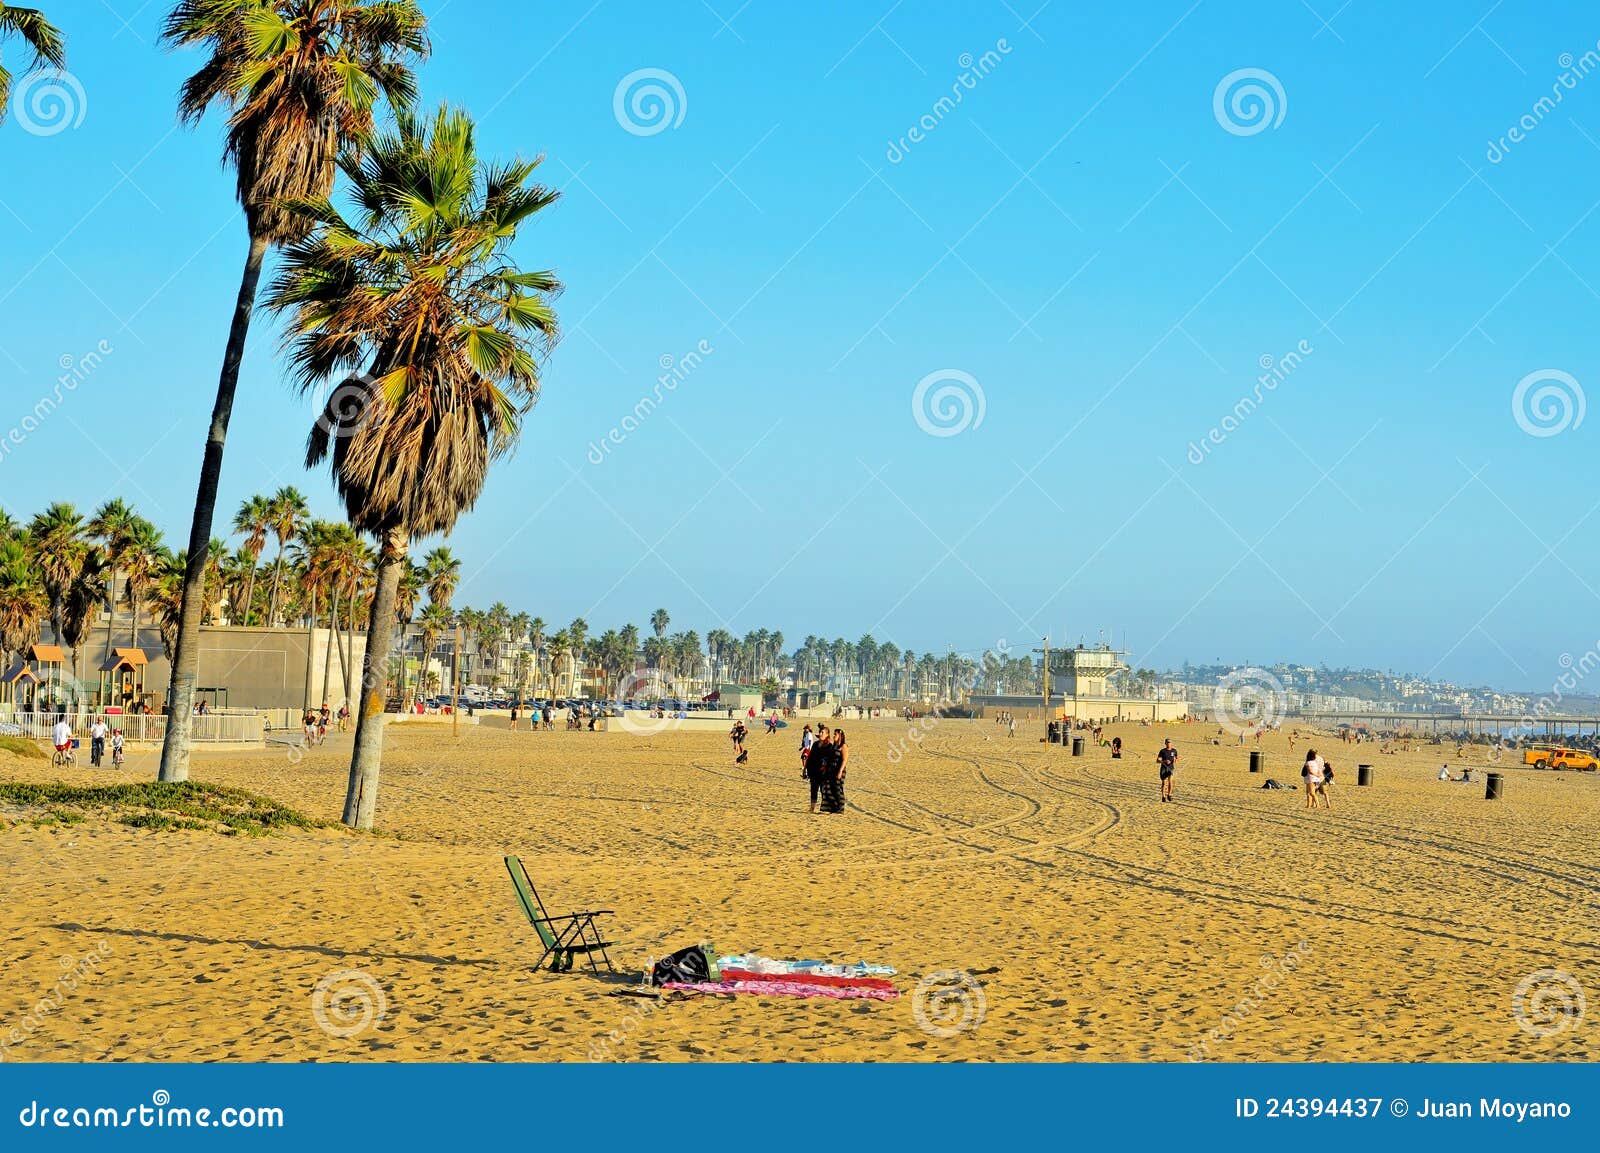 Venice Beach, Venice, United States Editorial Photography - Image of ...